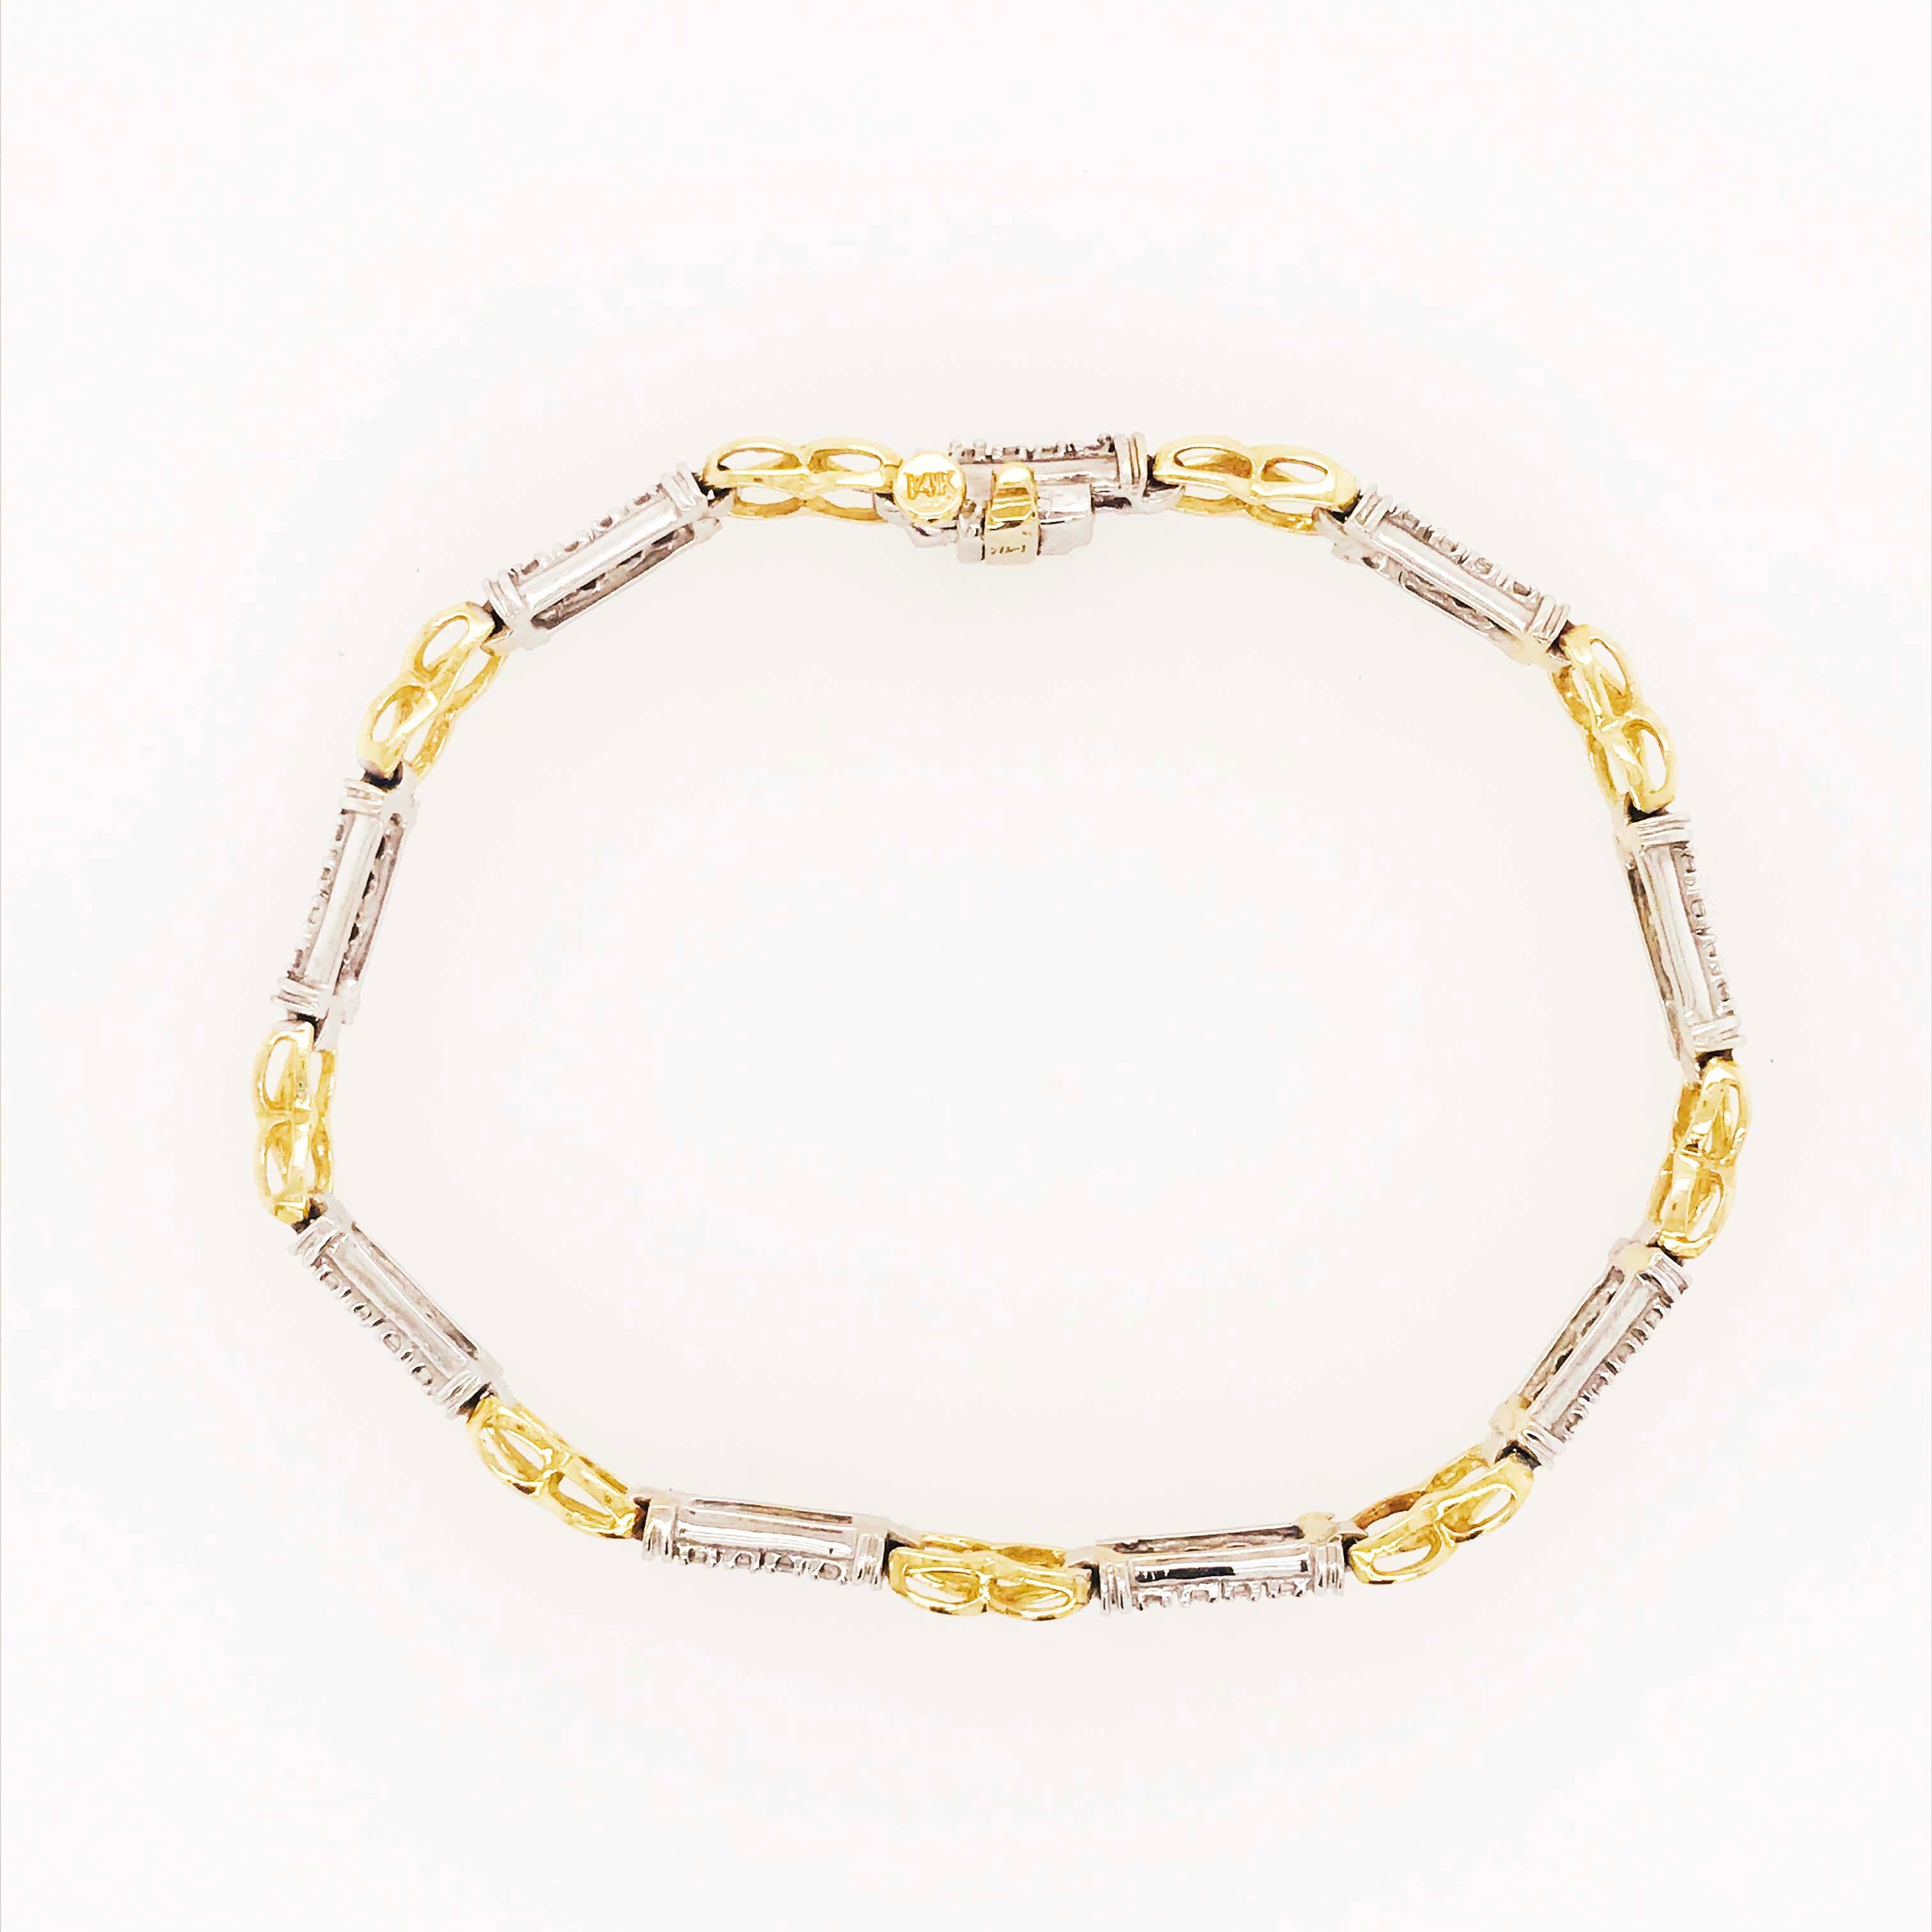 Women's Two-Tone Diamond Bracelet with Alternating White and Yellow Gold Links 1/2 Carat